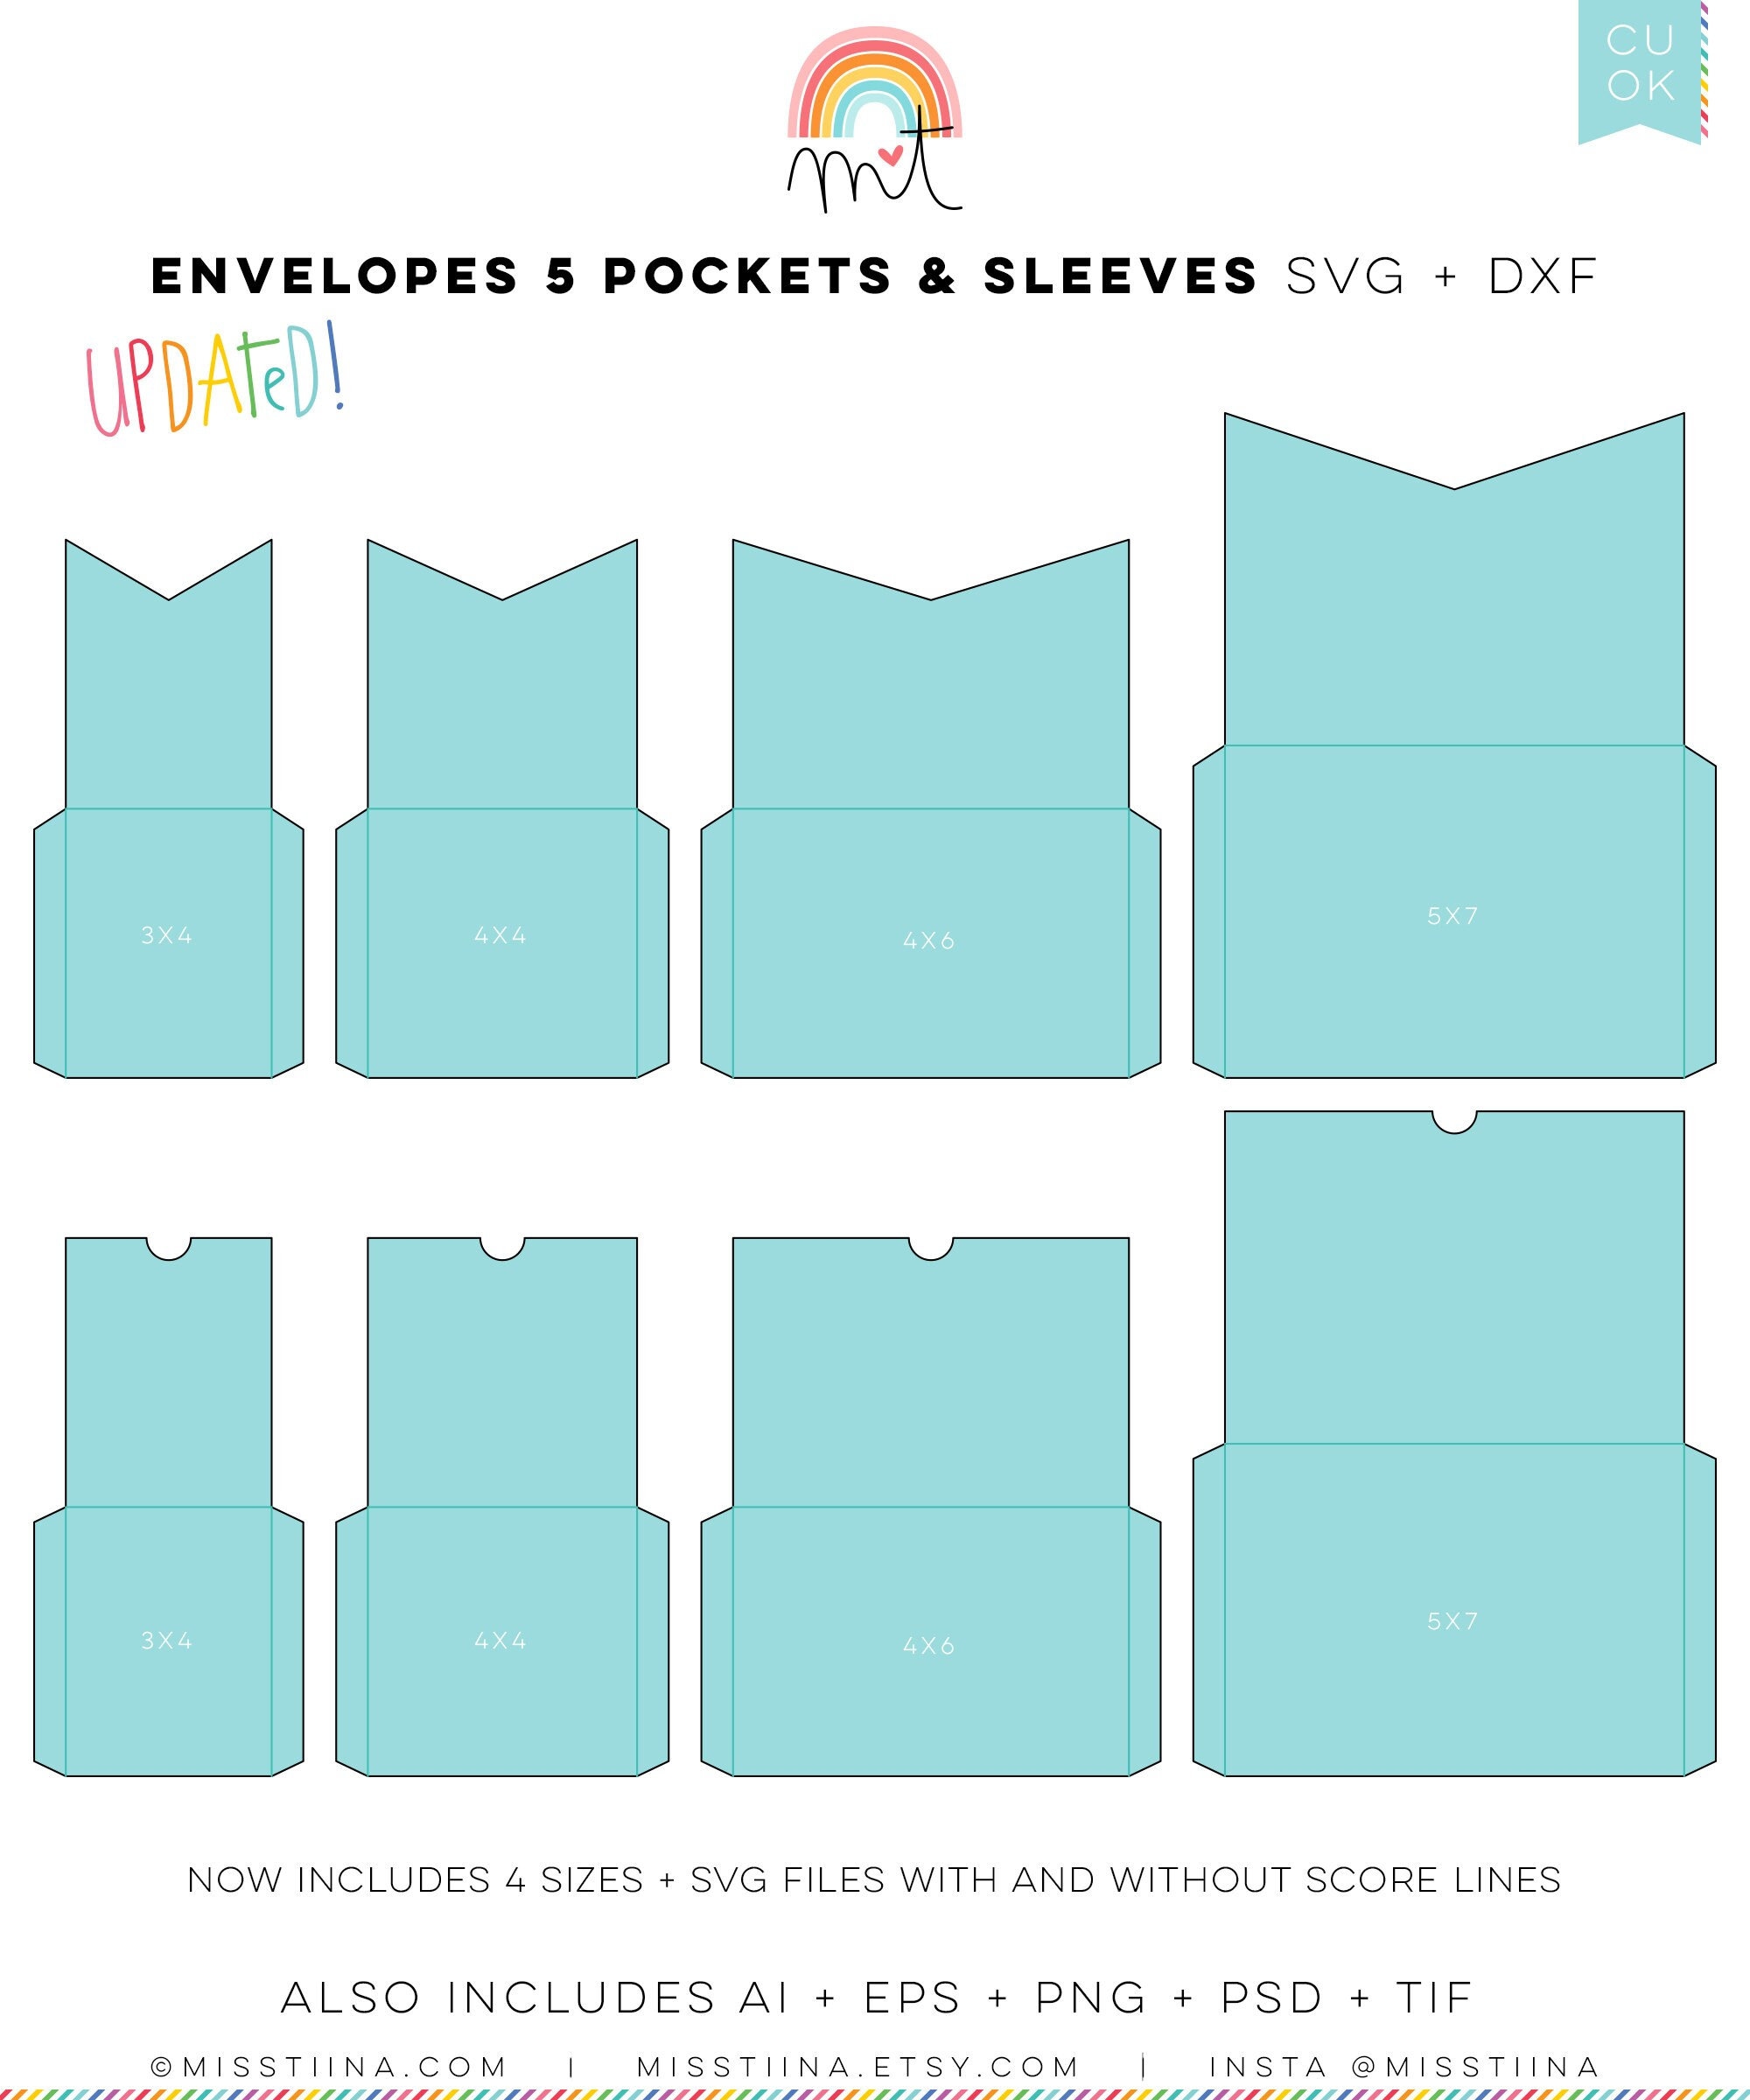 Envelopes 22 Pockets + Sleeves SVG DXF Digital Die Cutting files templates  card making scrapbooking crafts wedding birthday invitations Pertaining To Envelope Templates For Card Making